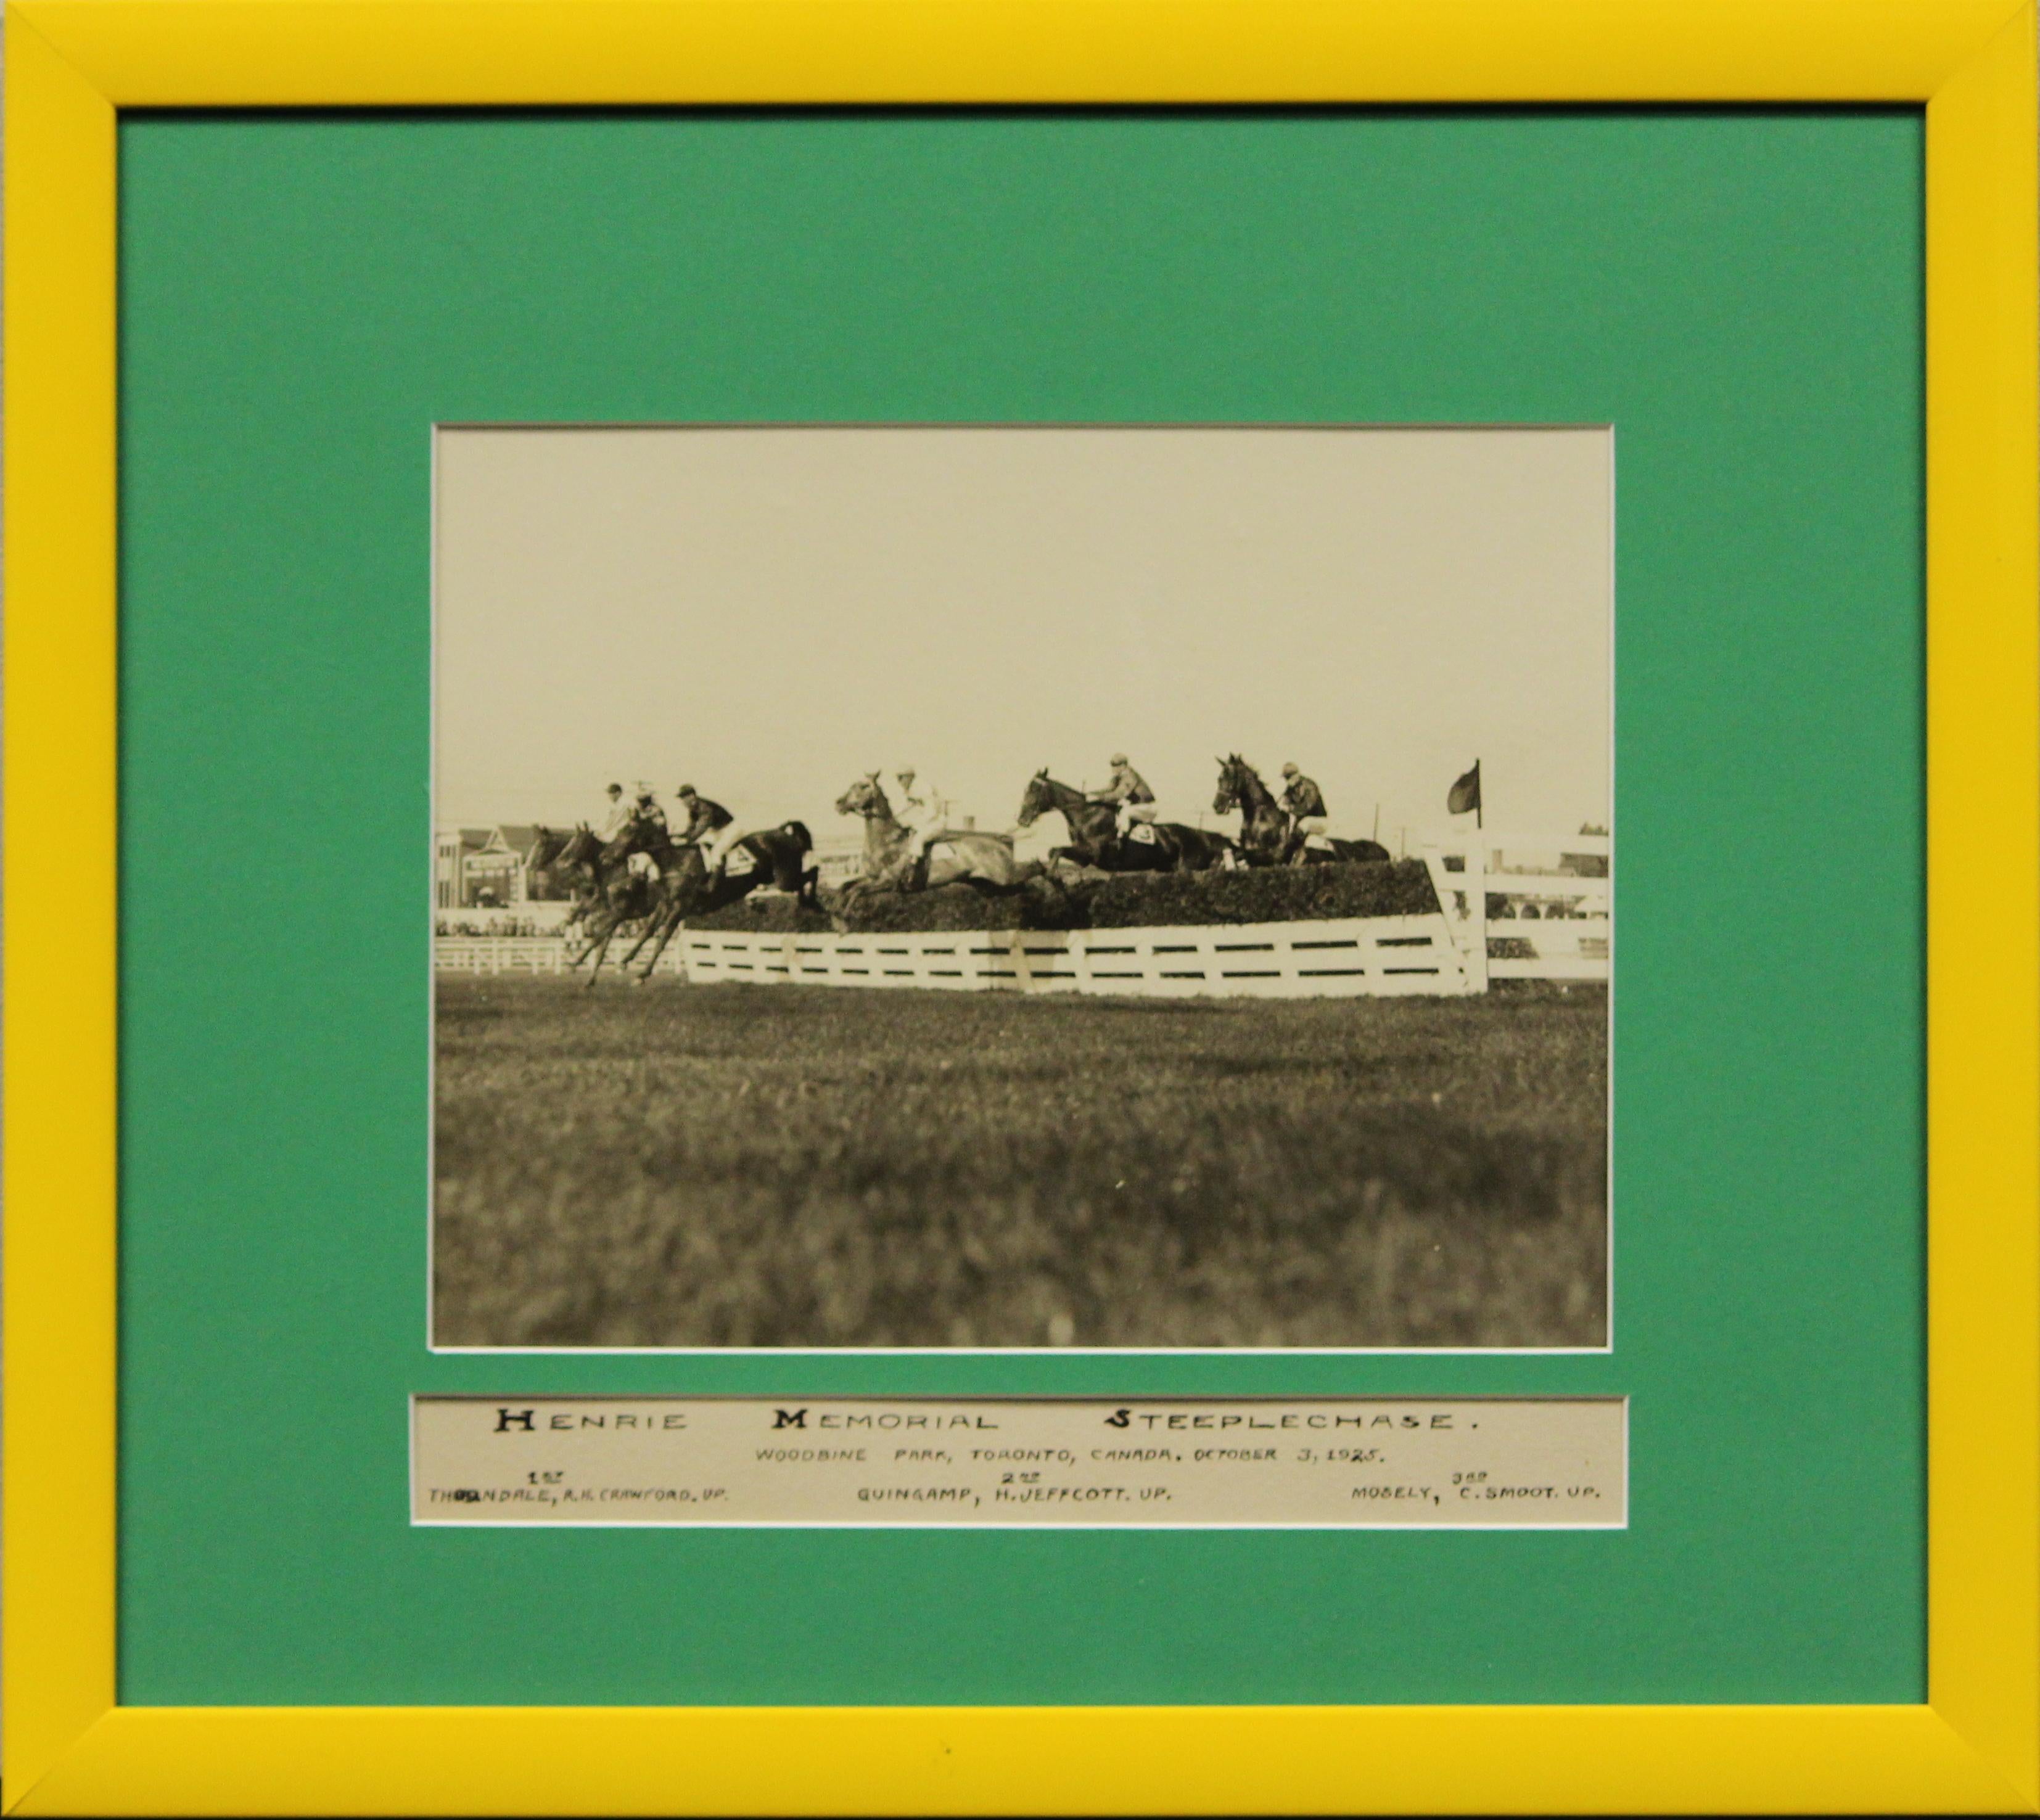 "Henrie Memorial Steeplechase" October 3, 1925 at Woodbine Park, Toronto, Canada - Photograph by C.C. Cook